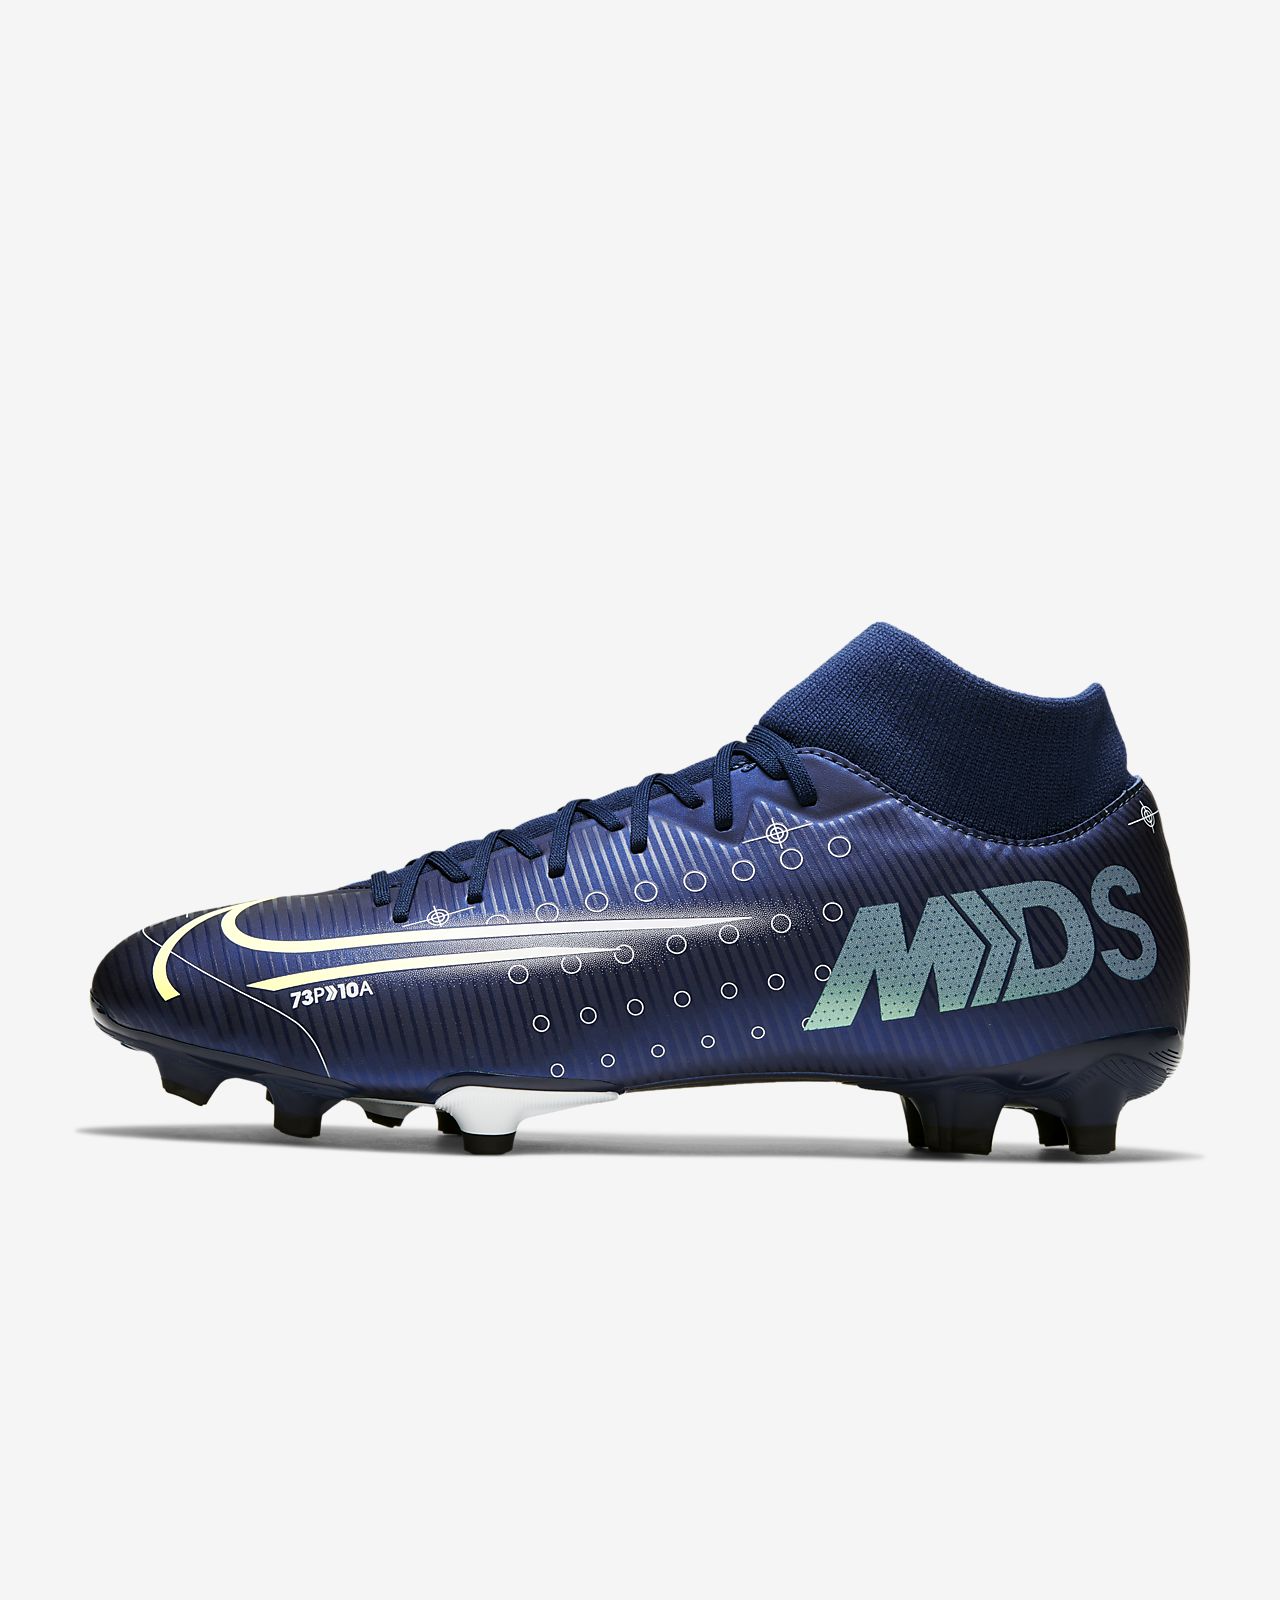 Nike Mercurial Superfly 6 Elite FG New World Cup Cleats